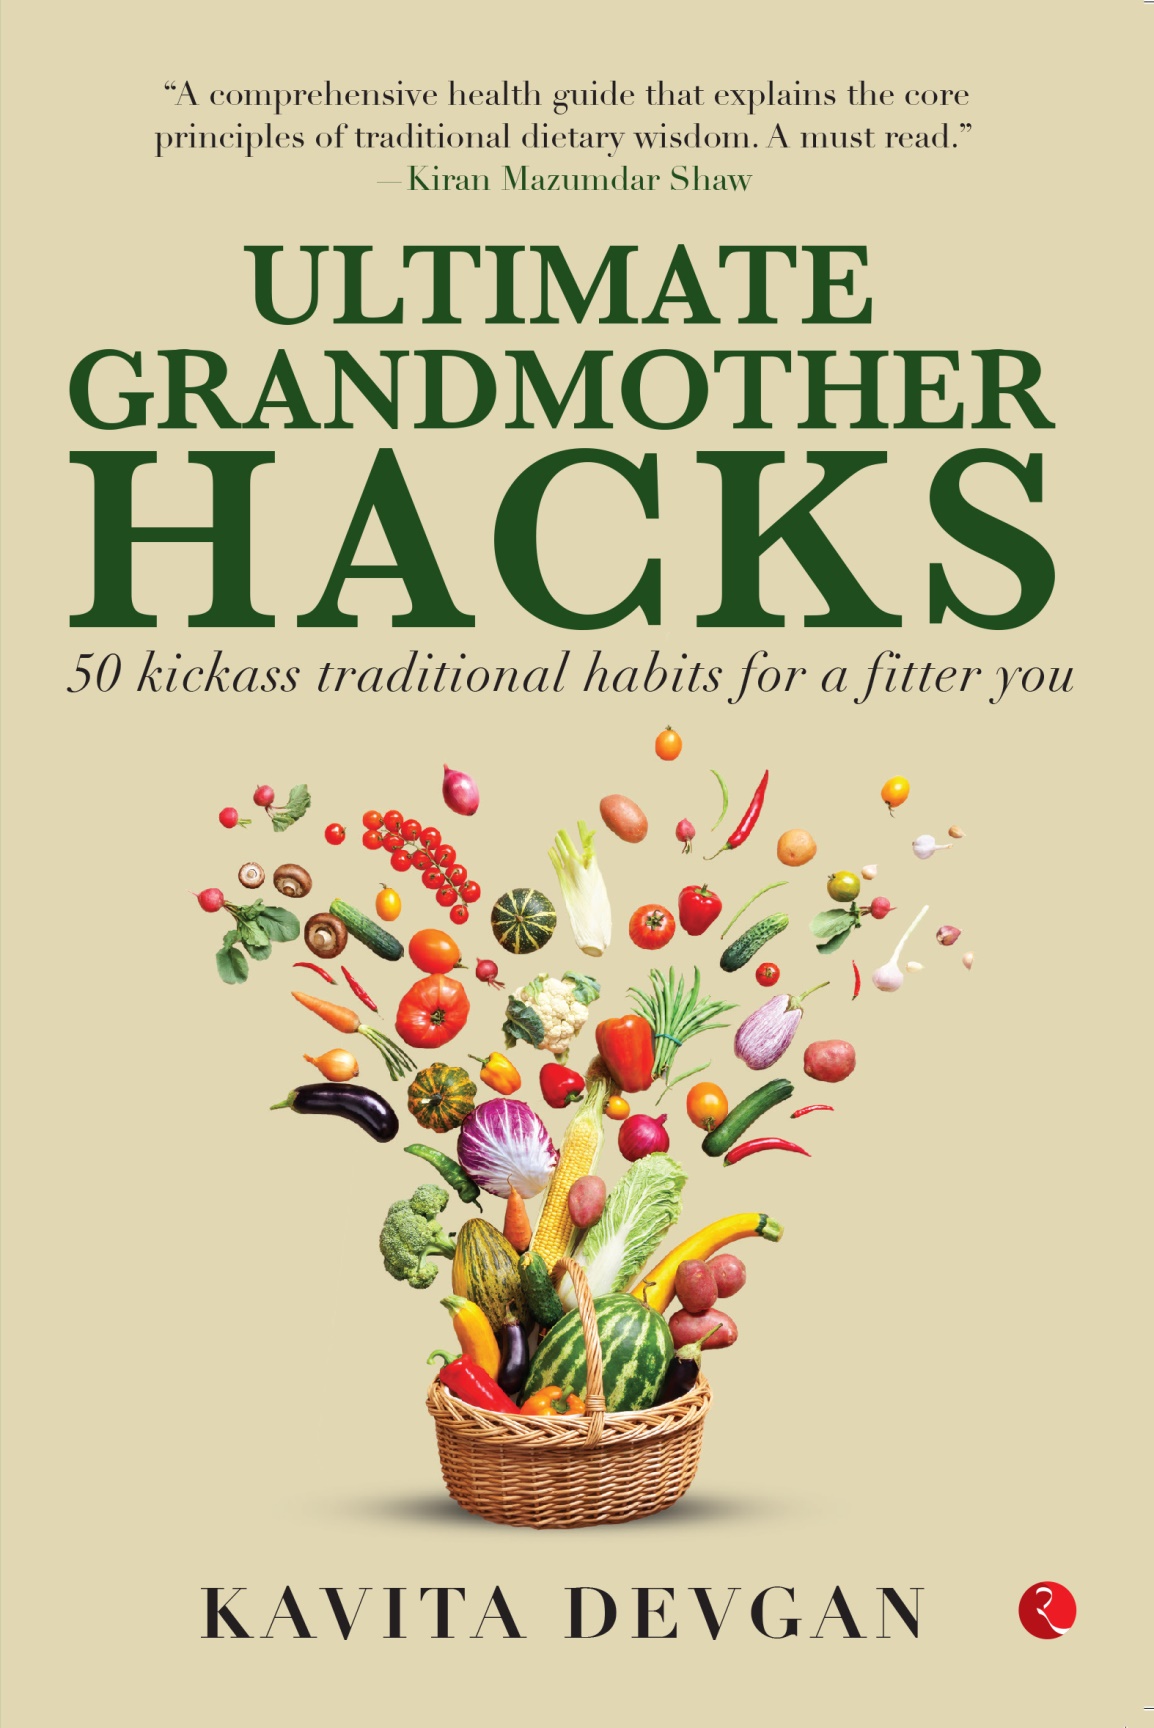 Grand ma's Hecks Book for Go Traditional way of eating habits for children parents schools 